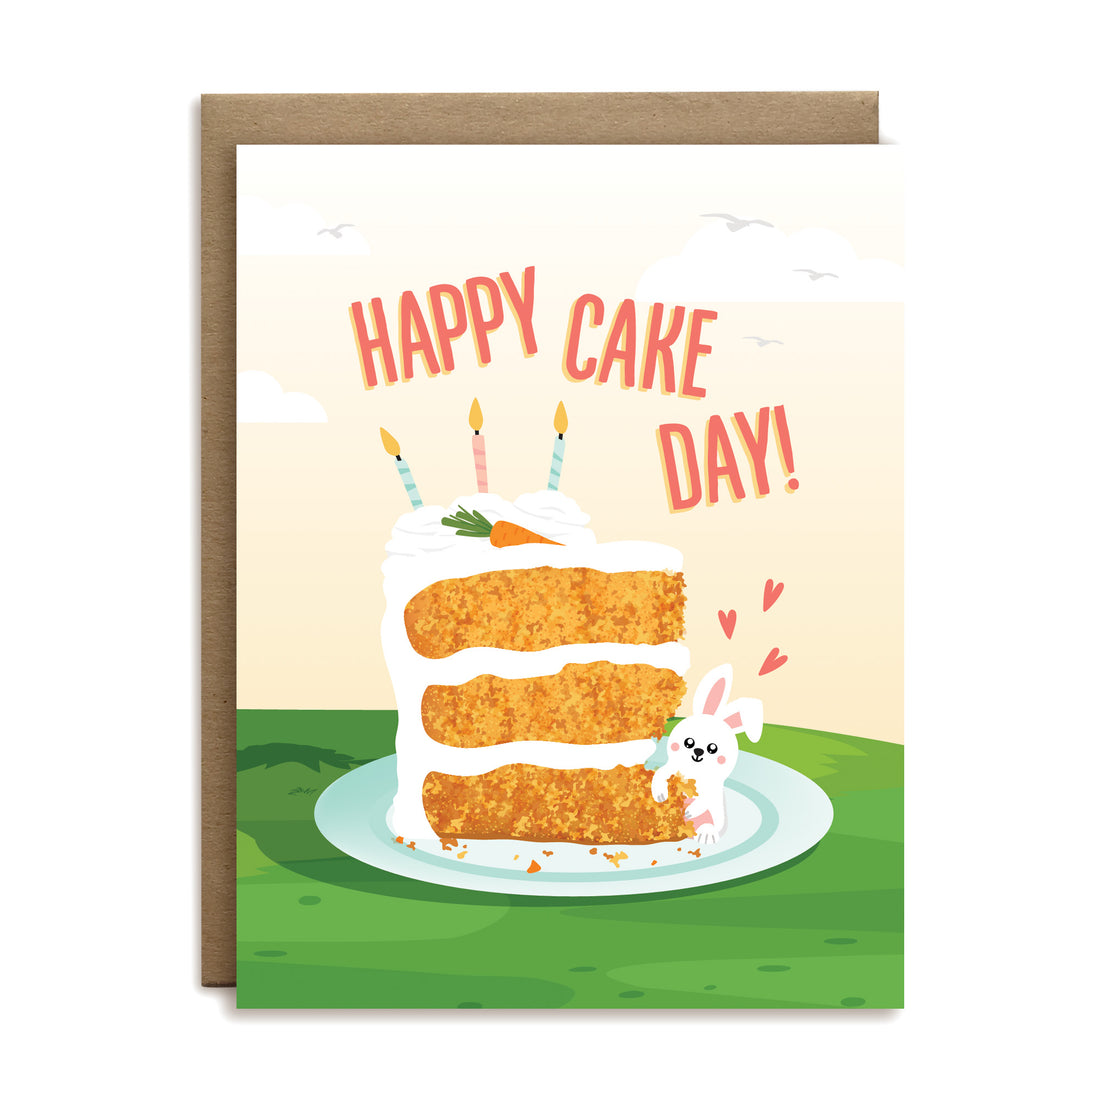 Happy cake day carrot cake and bunny birthday greeting card by I&